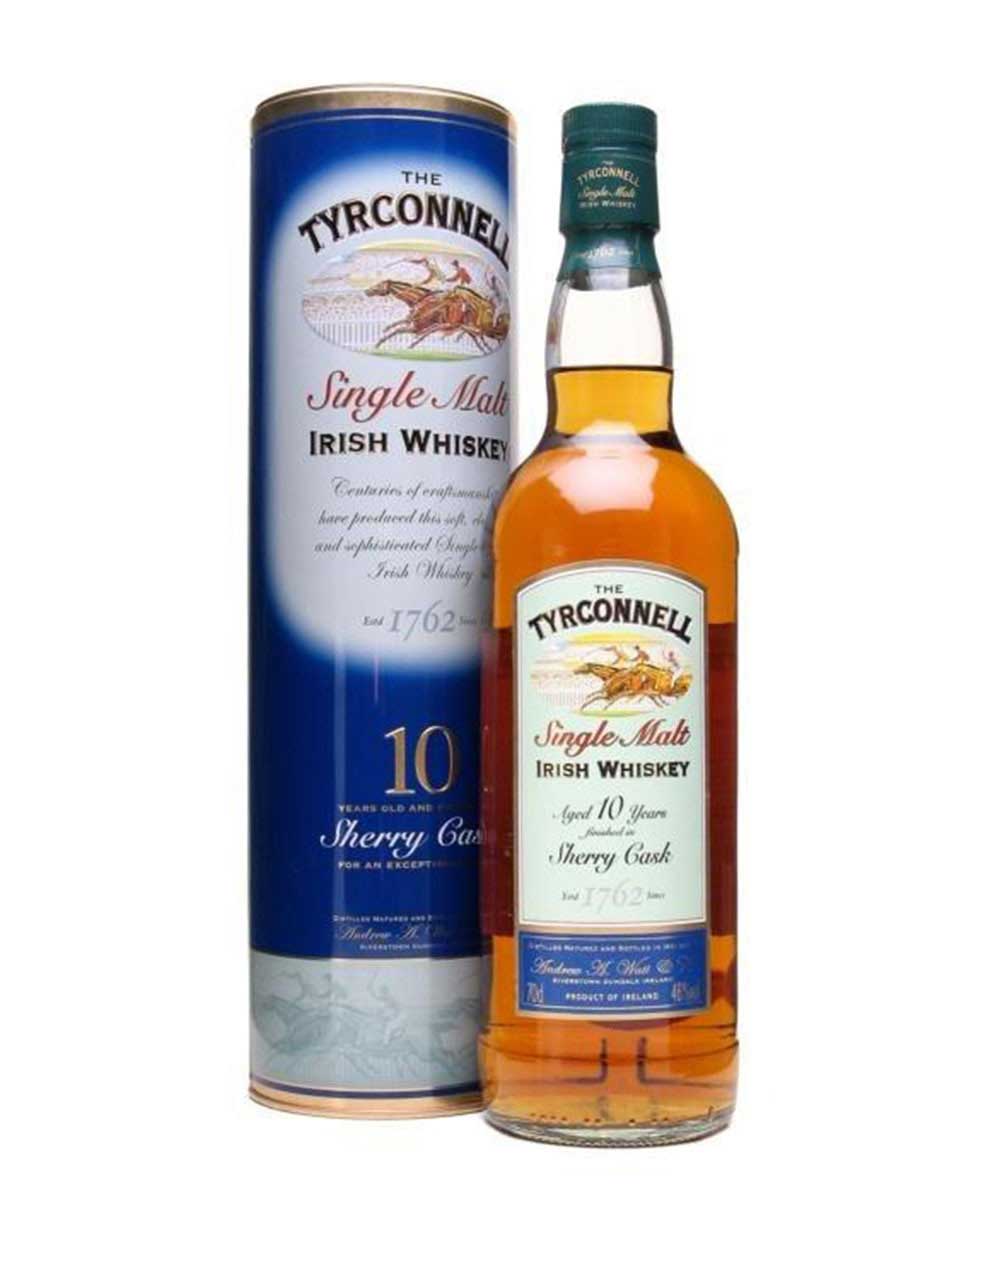 The Tyrconnell 10 Year Old Sherry Cask Finish Whiskey